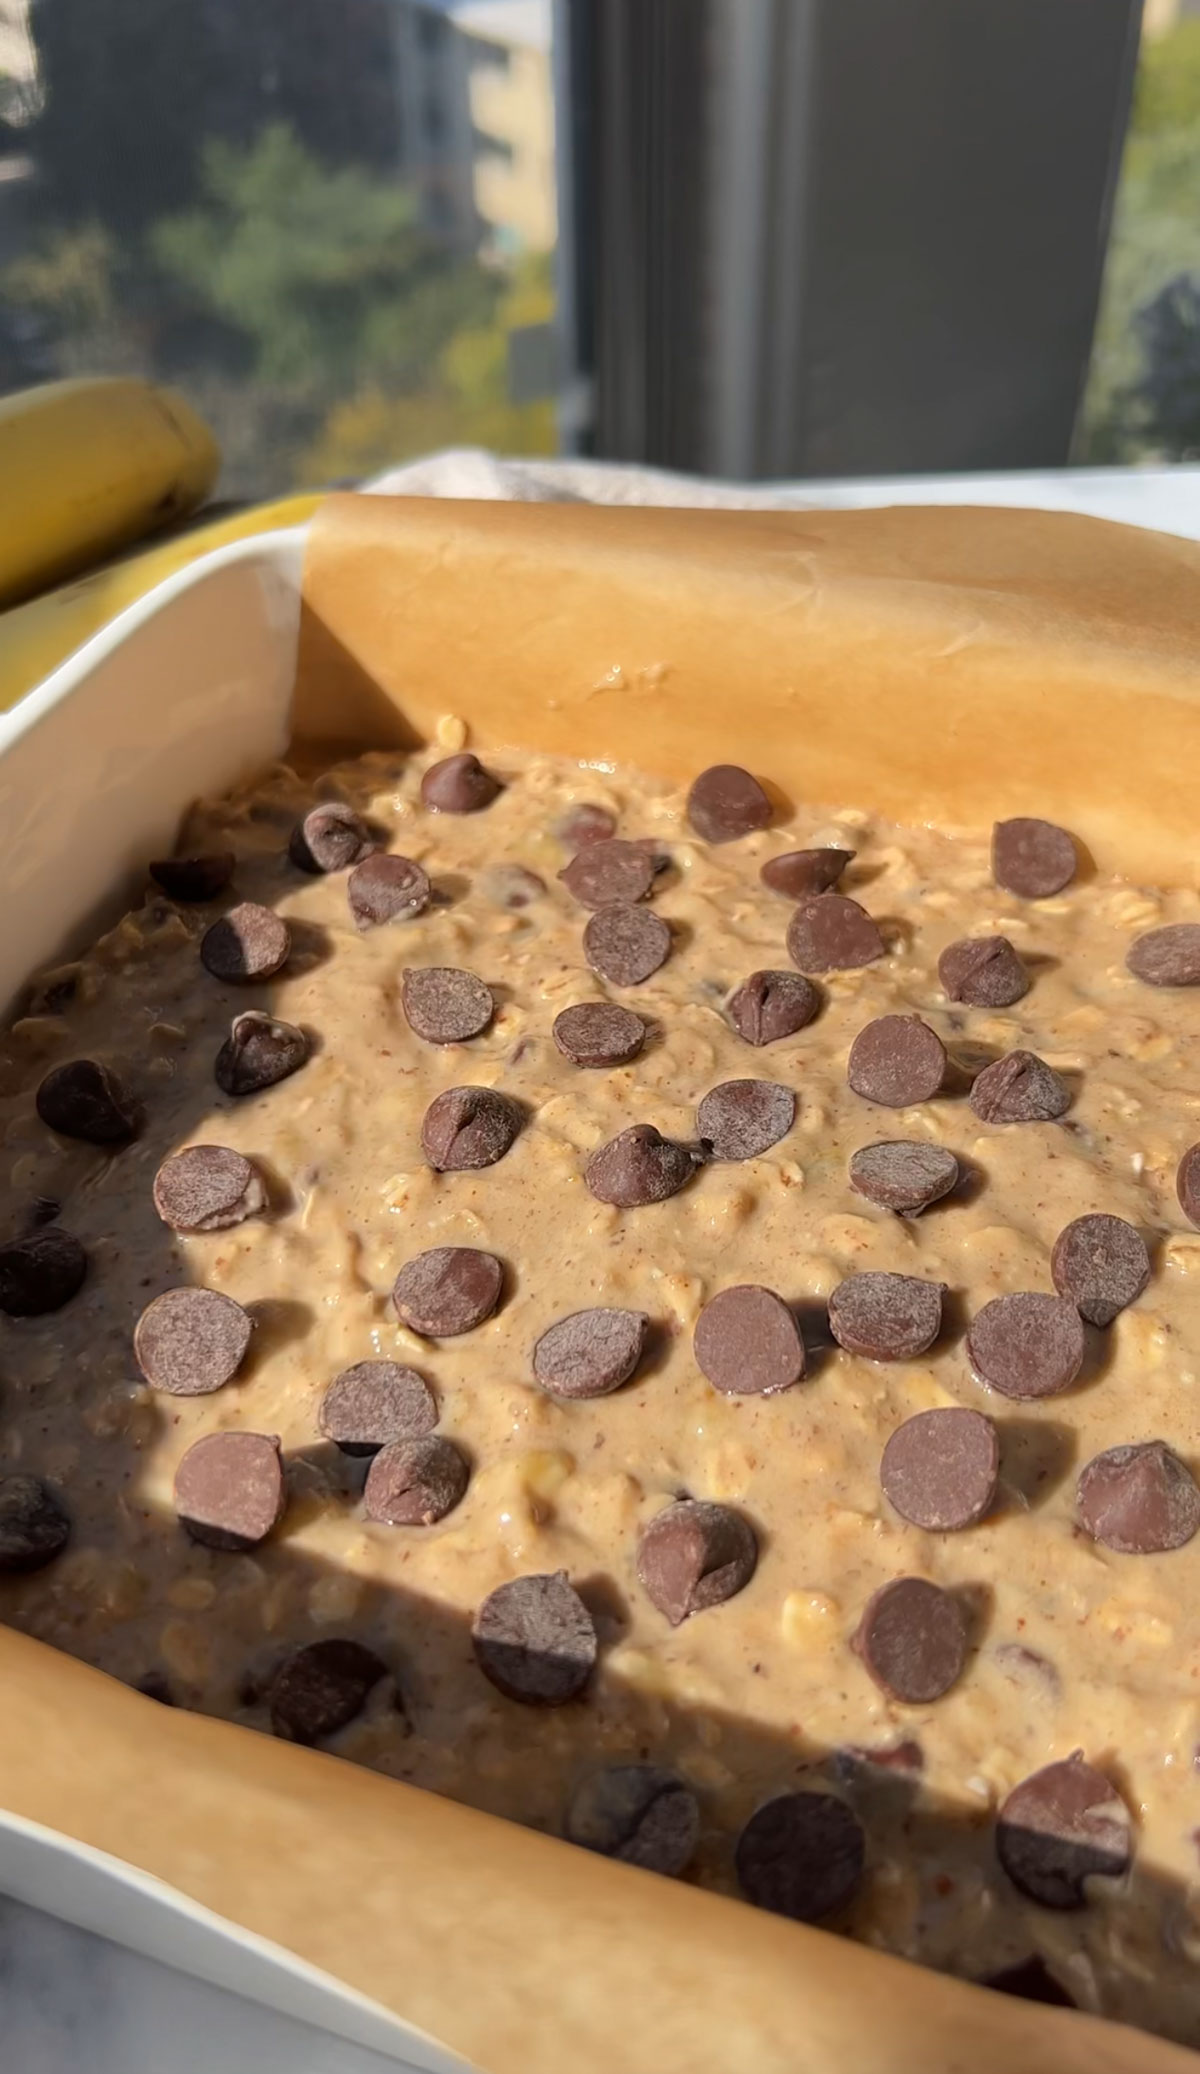 Mixture spread into a pan and topped with chocolate chips.